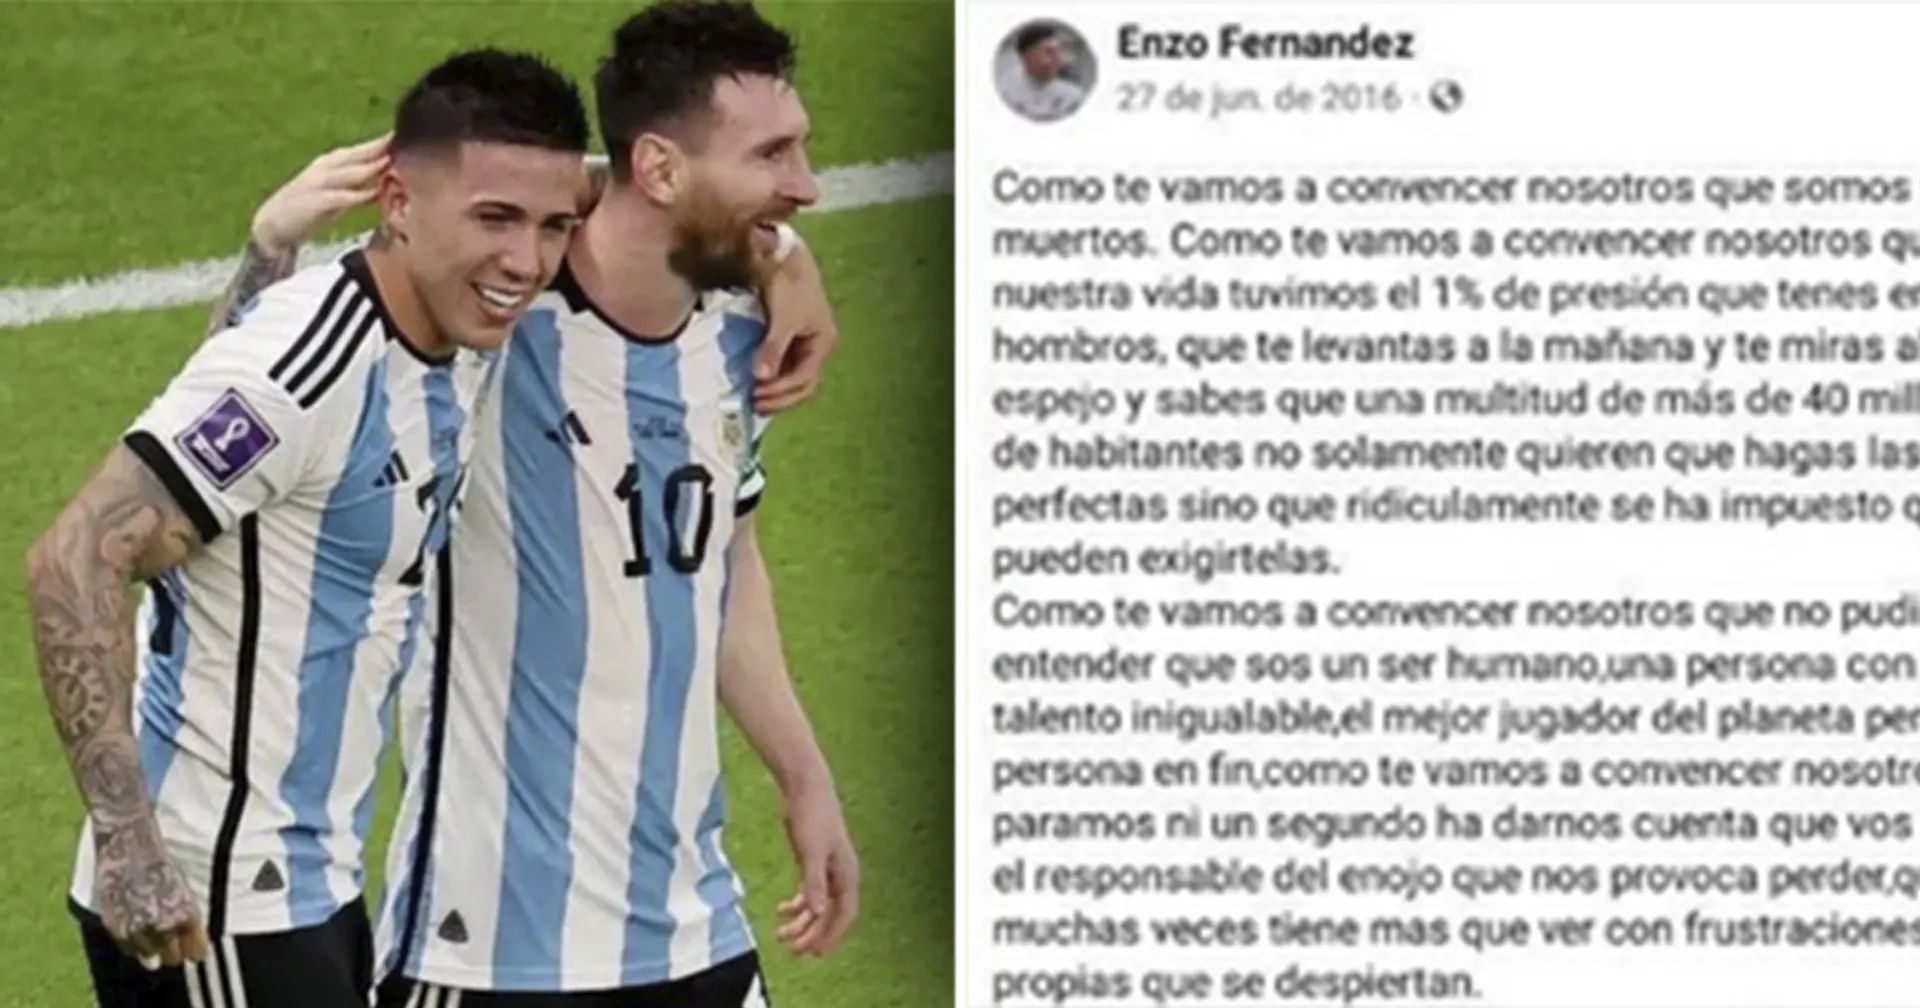 Who is Enzo Fernandez and why his emotional letter to Messi from 6 years ago went viral